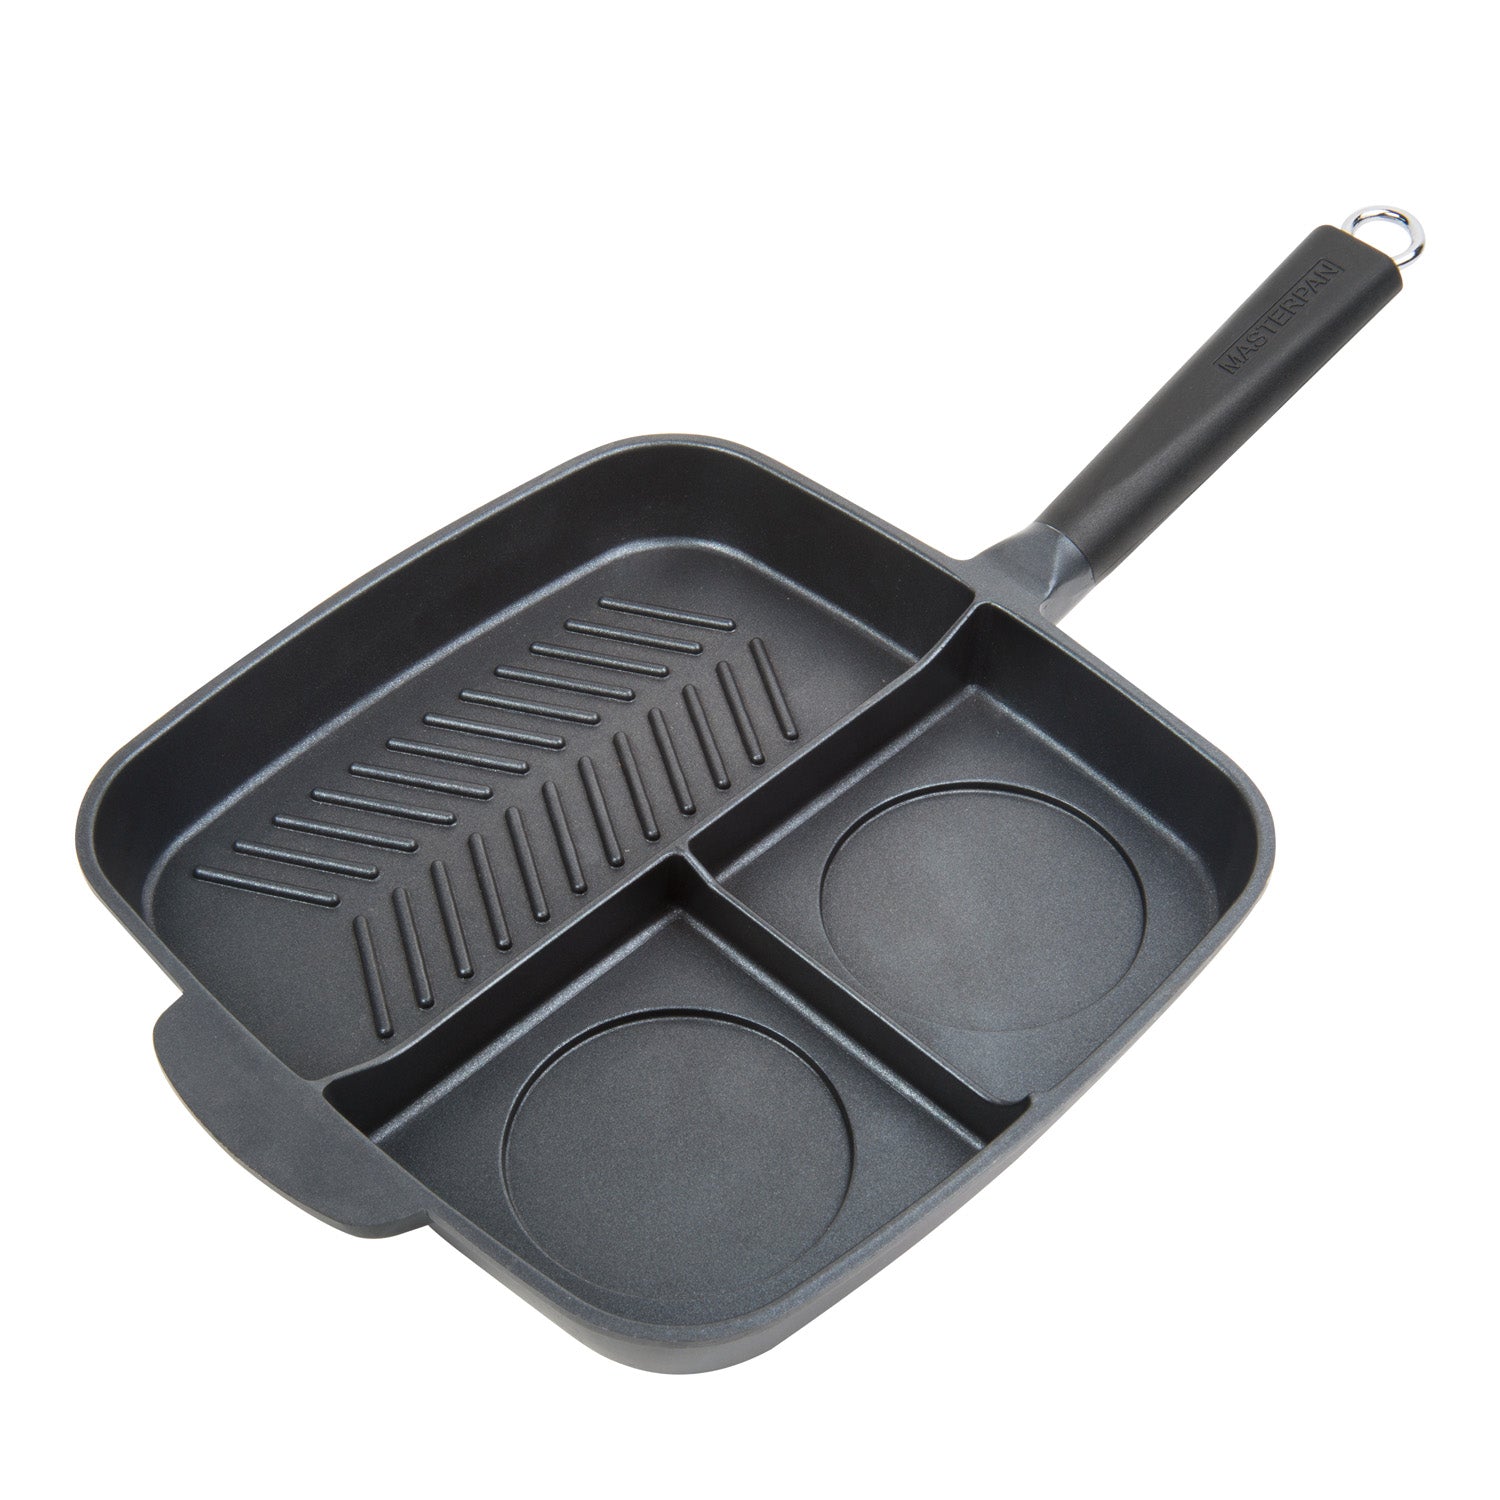  MsMk Square Grill Pan with lid, Stay-Cool Handle, Each